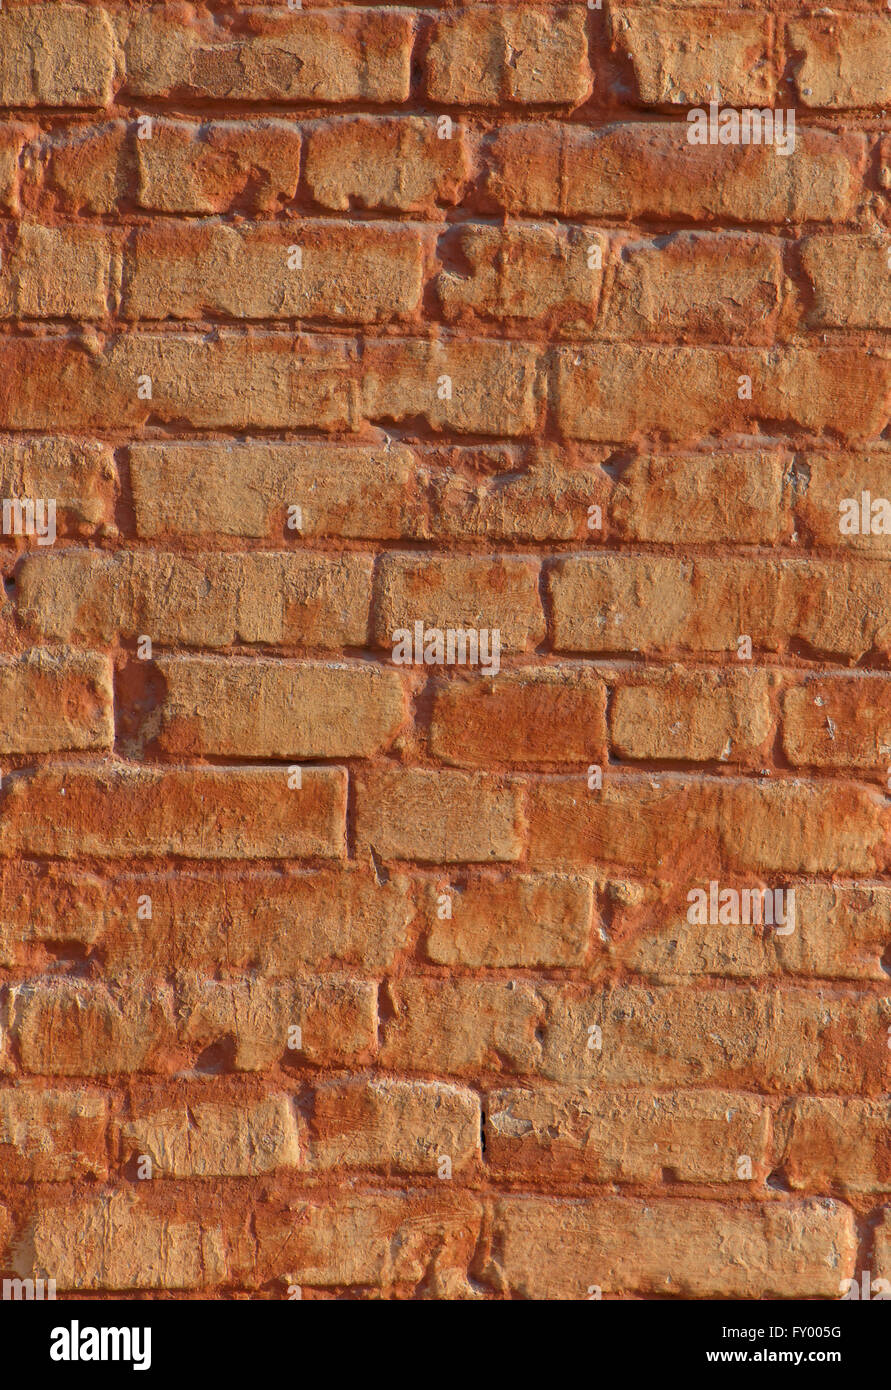 red brick wall background Stock Photo